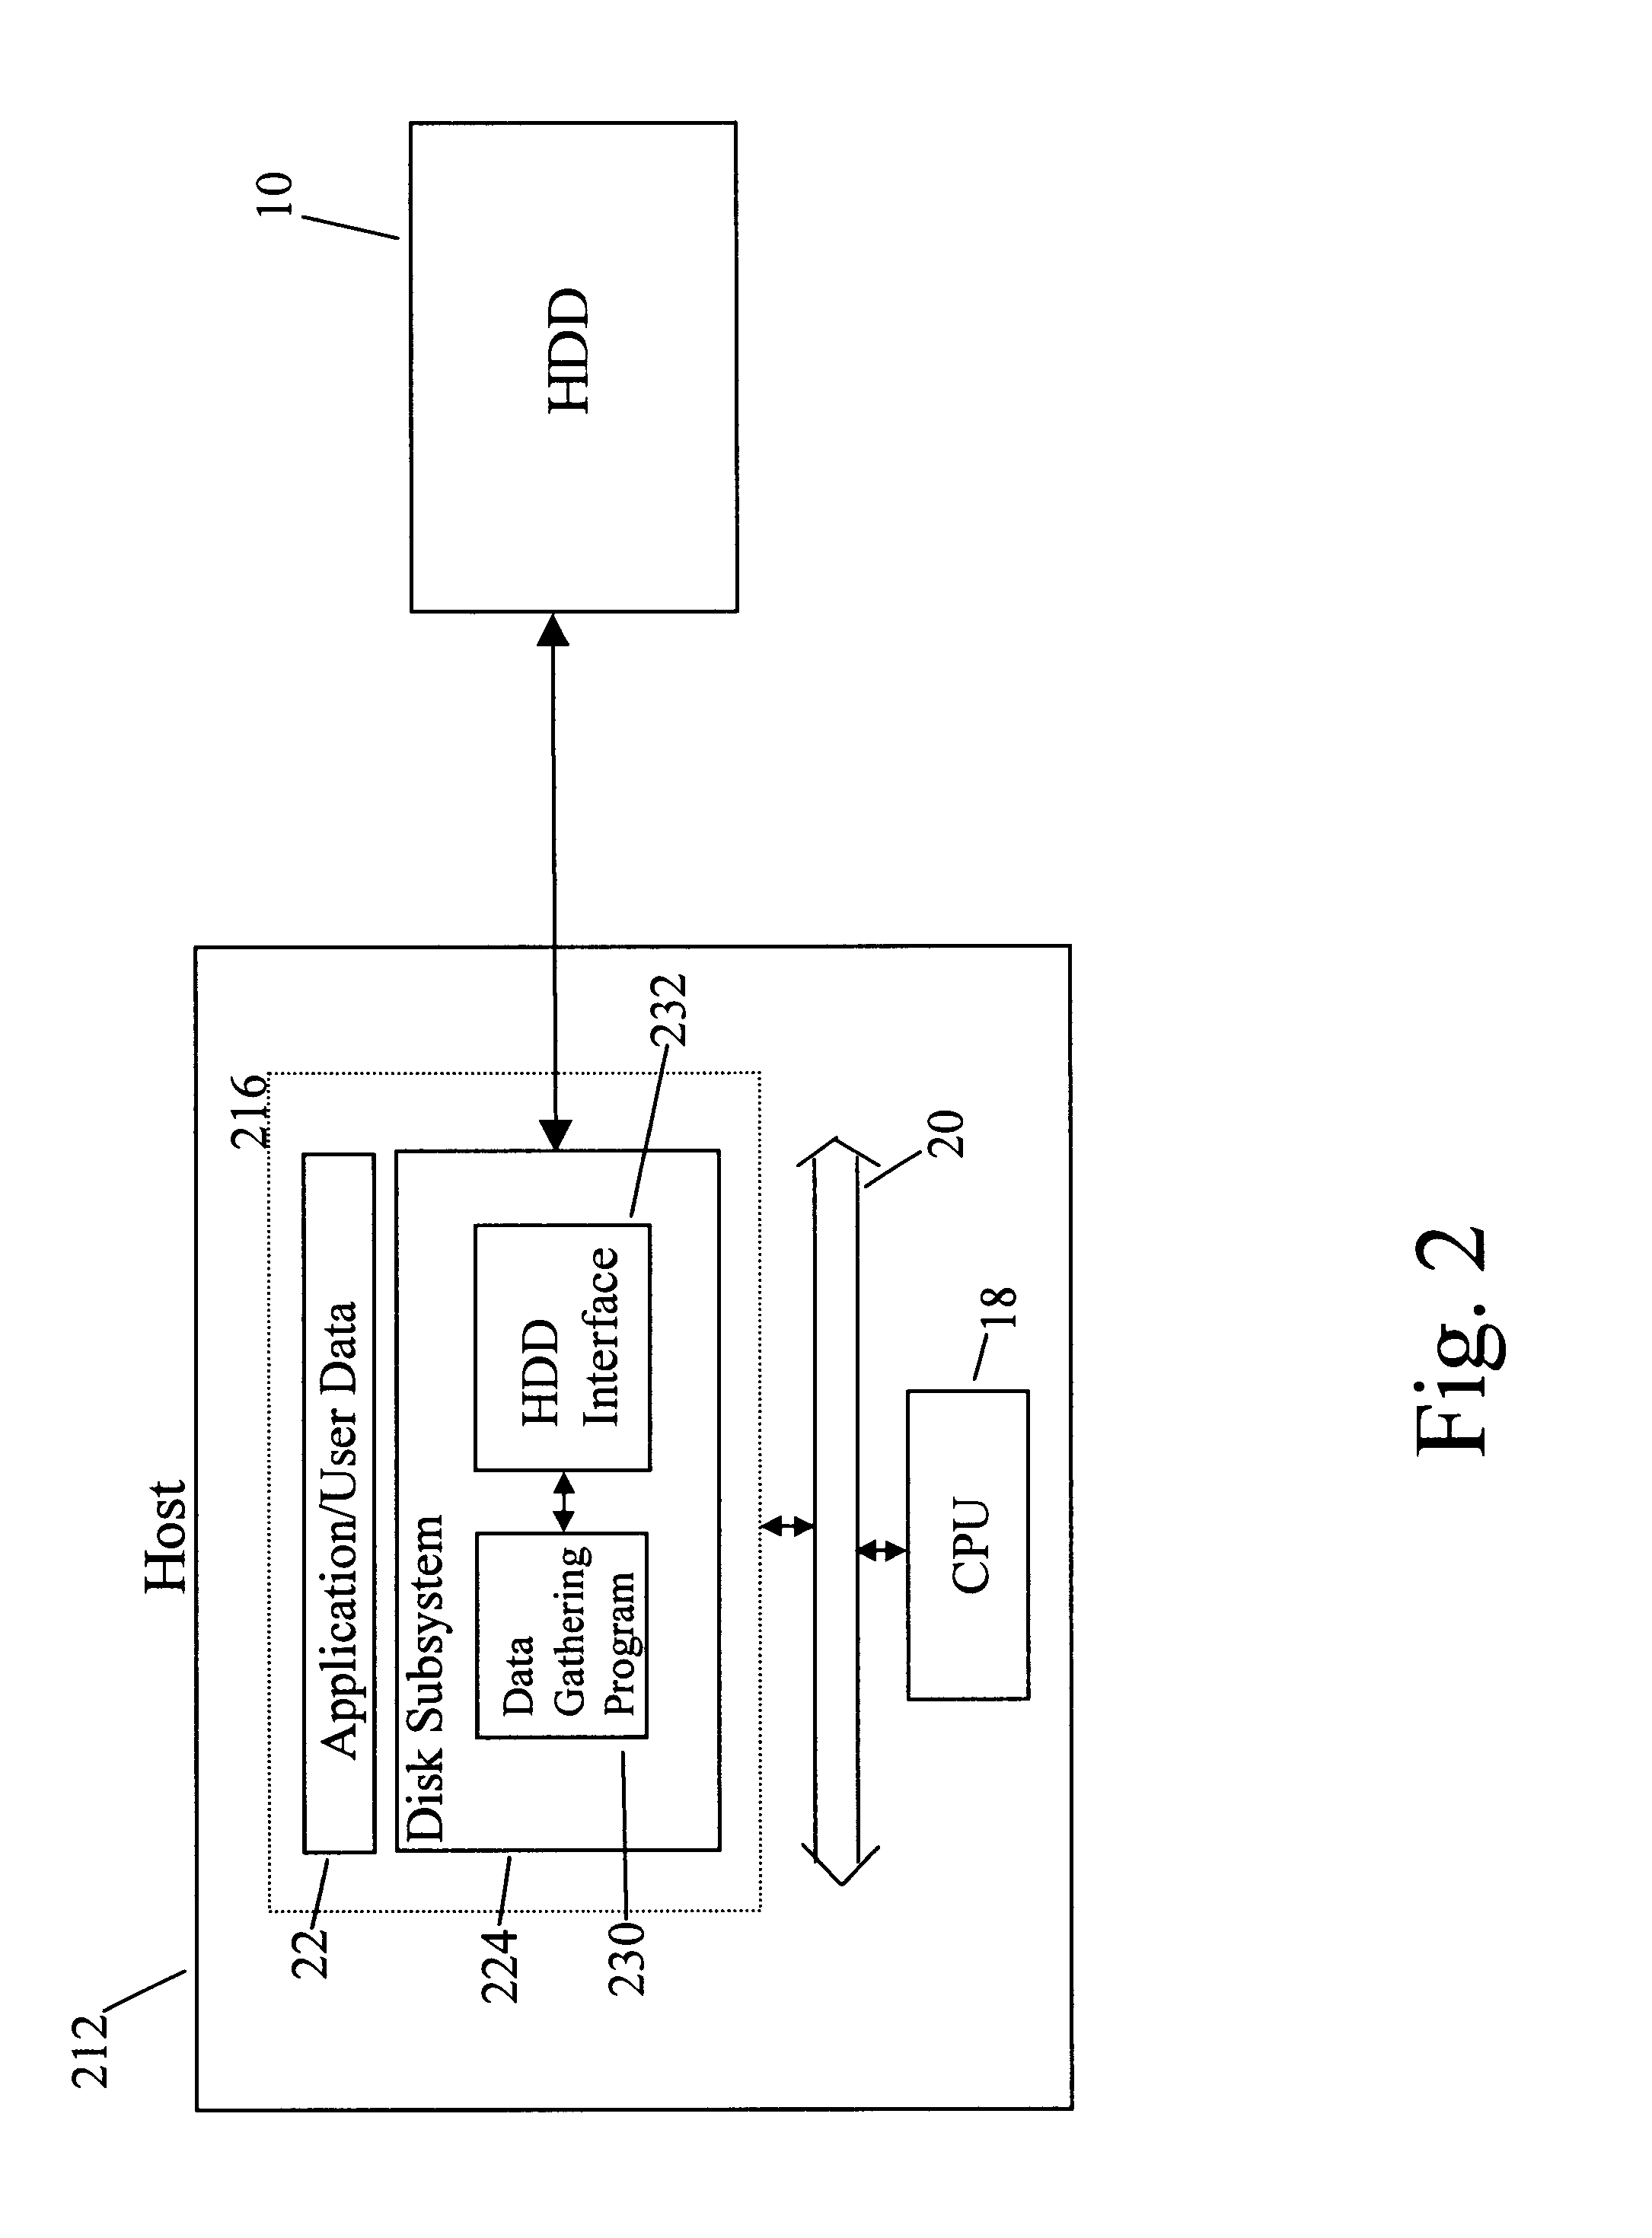 Automatic acquisition of physical characteristics of a hard drive